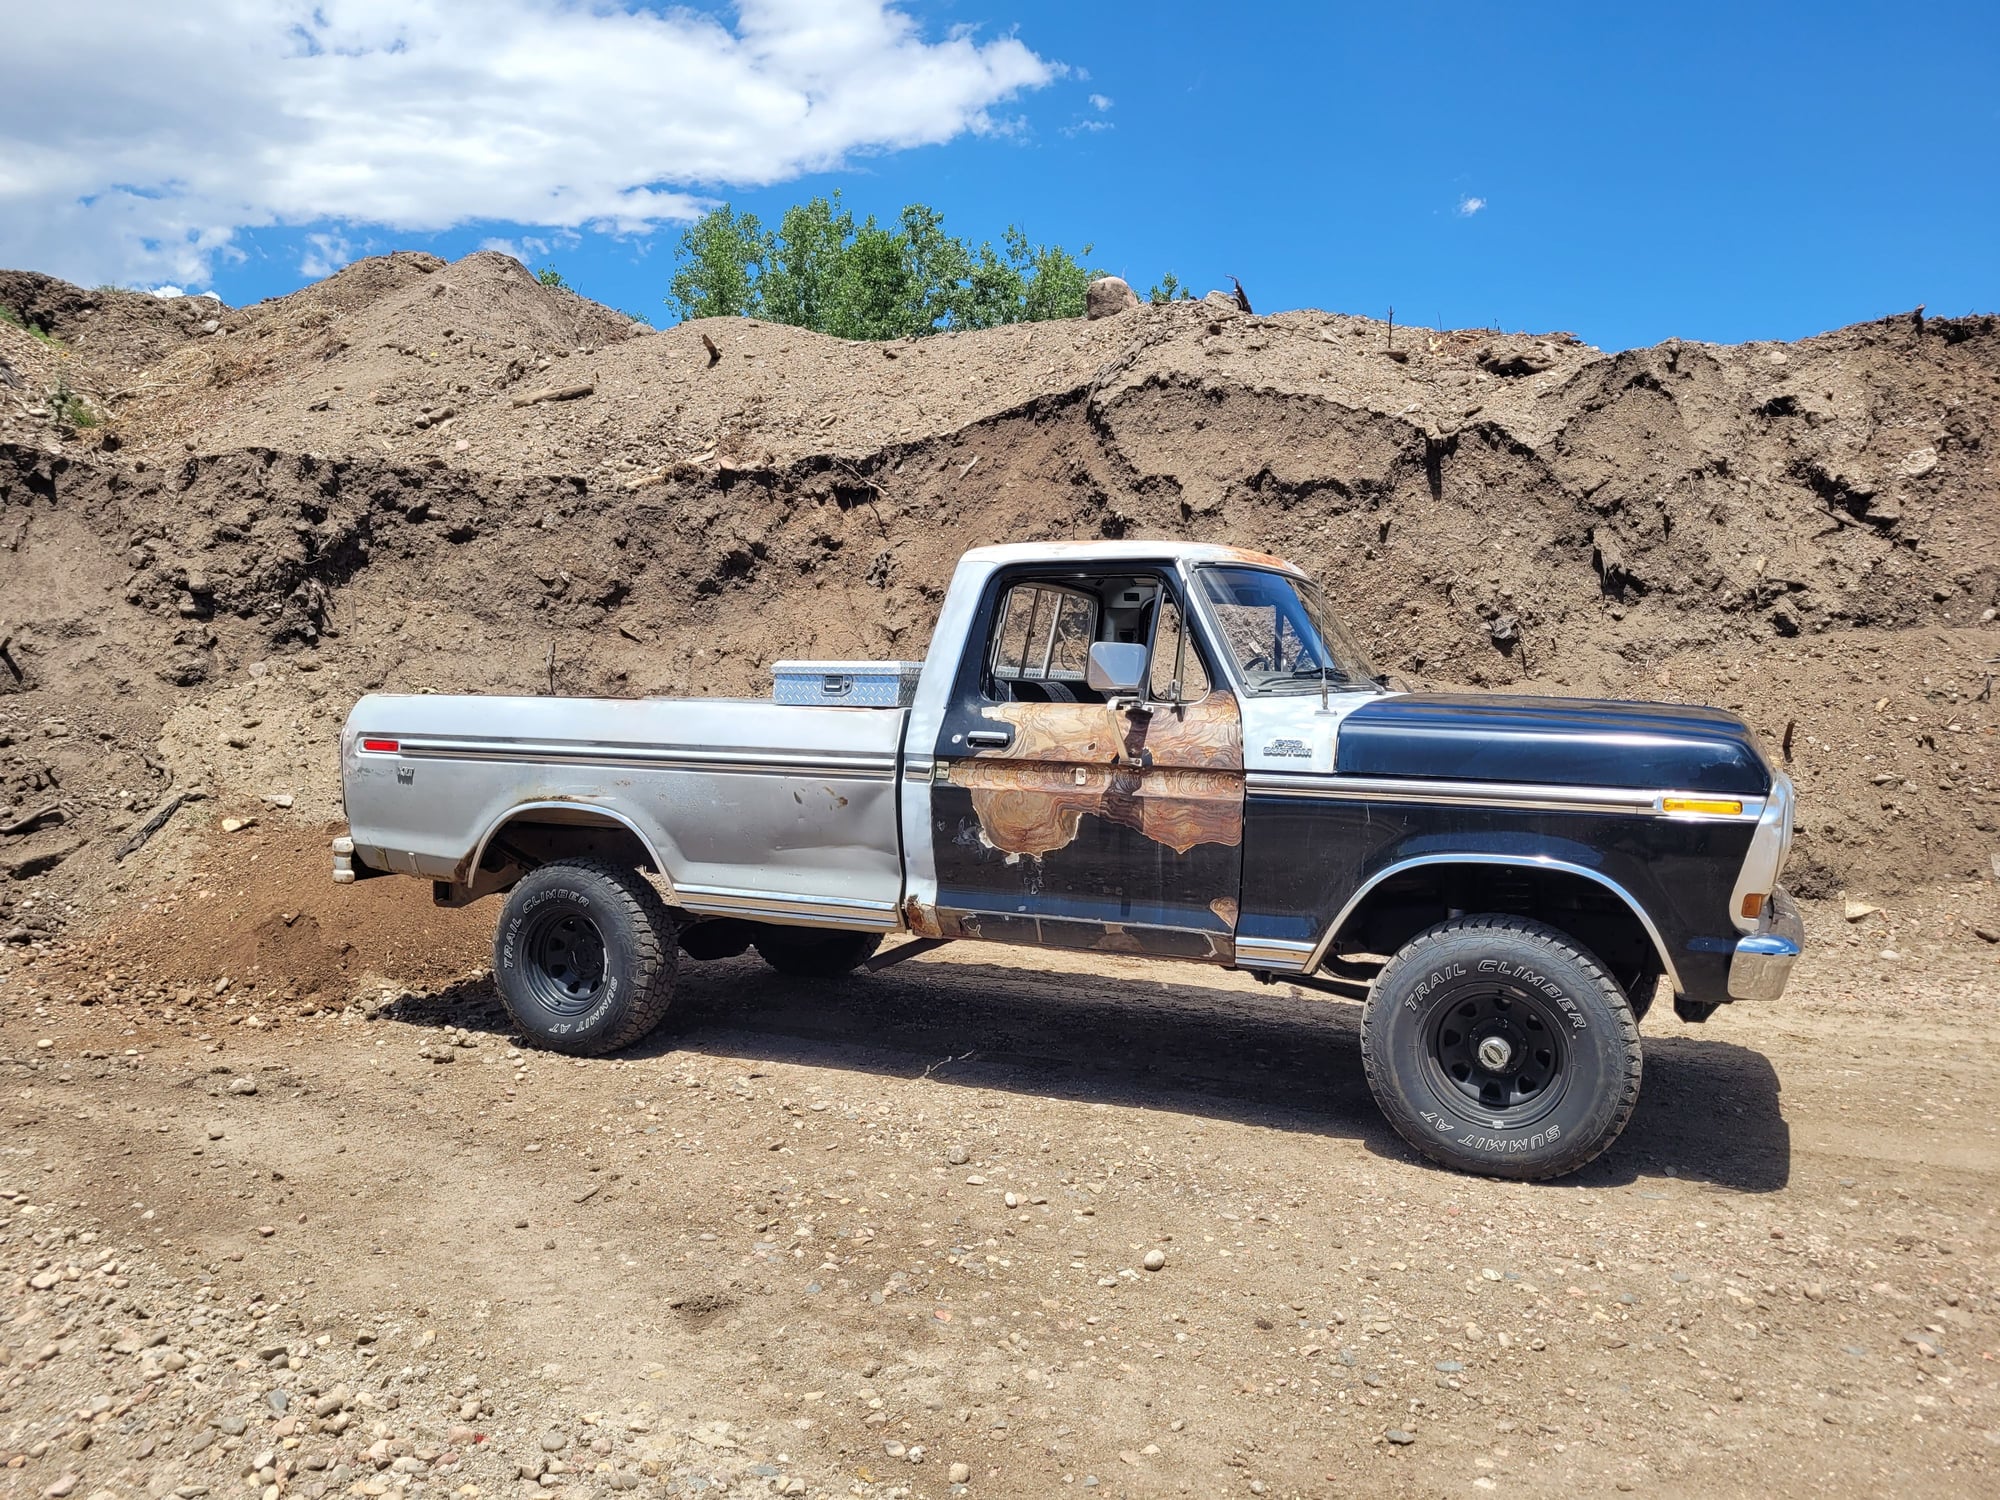 1977 Ford F-150 - 1977 F150 Ranger XLT - Used - VIN F14HRZ03736 - 81,000 Miles - 8 cyl - 4WD - Manual - Truck - Silver - Colorado Springs, CO 80919, United States